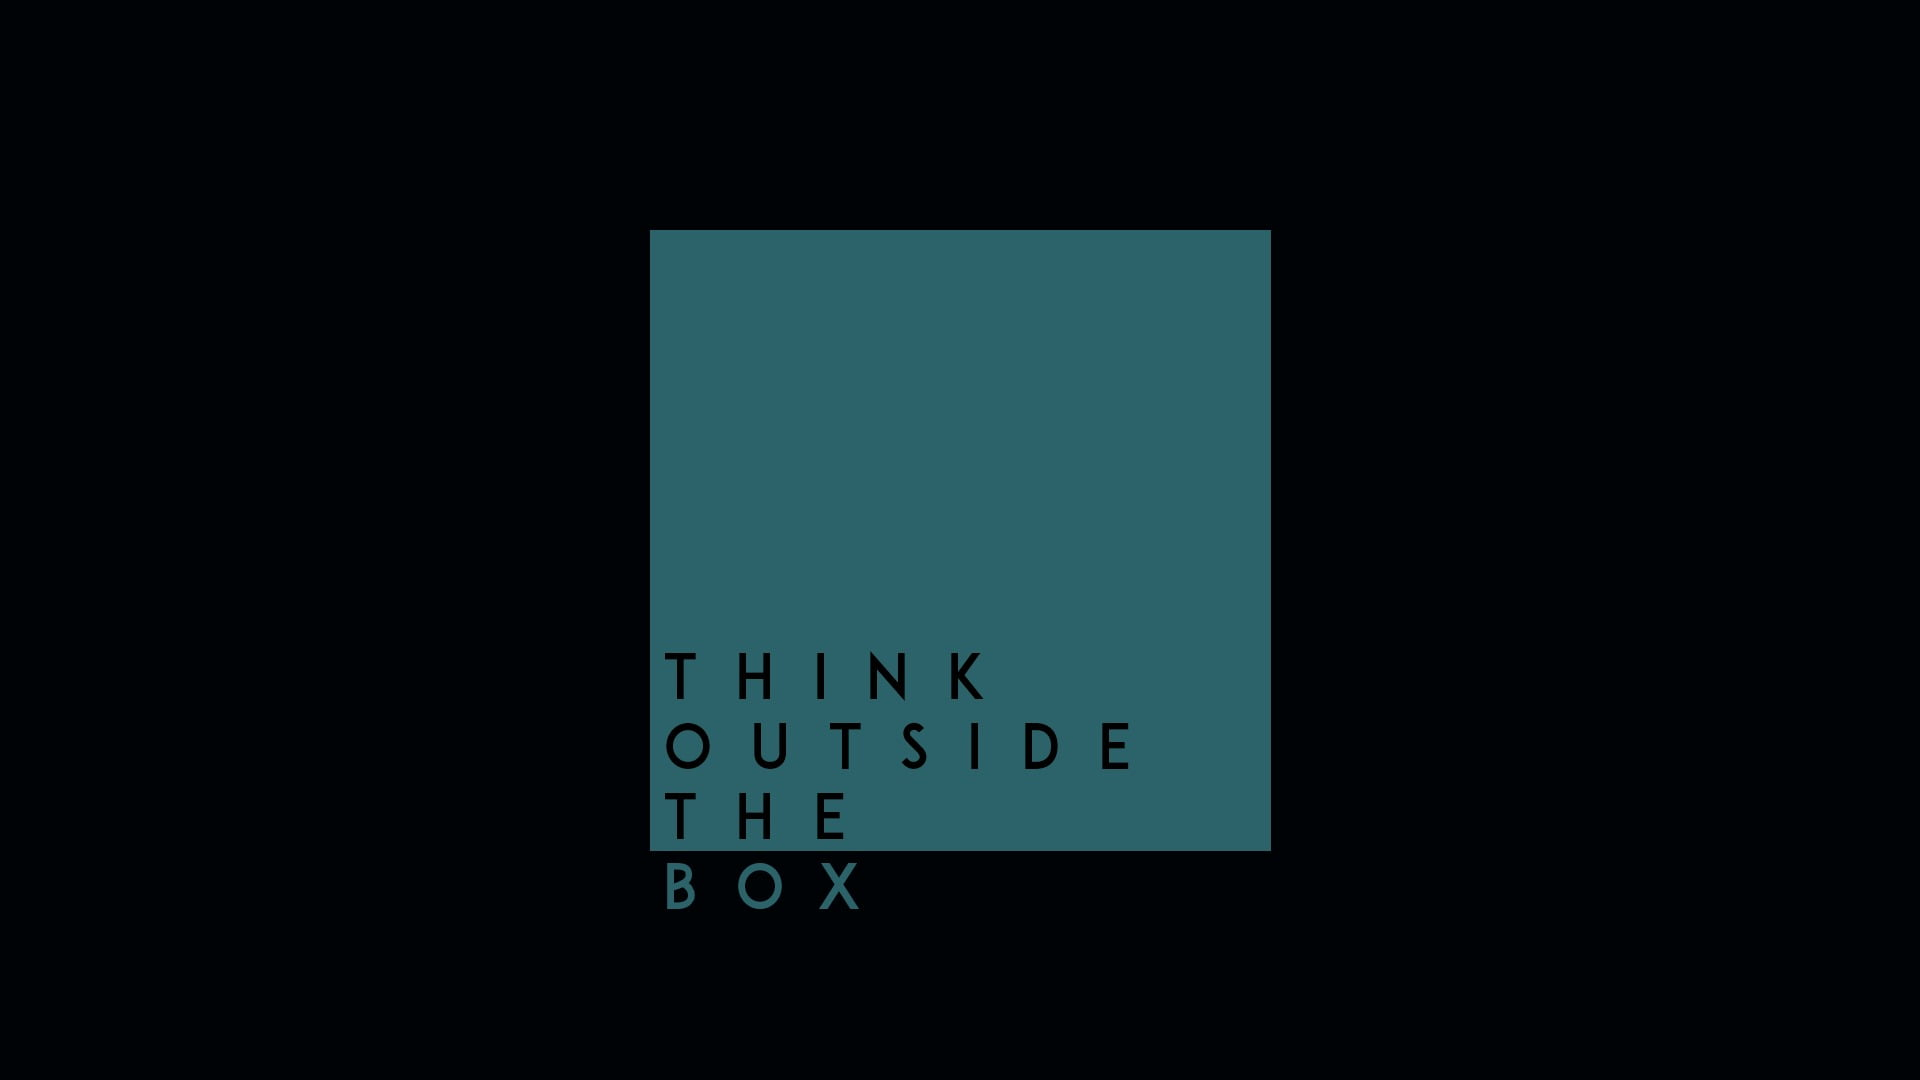 Wallpaper Think Outside The Box, simple background, motivational, quote